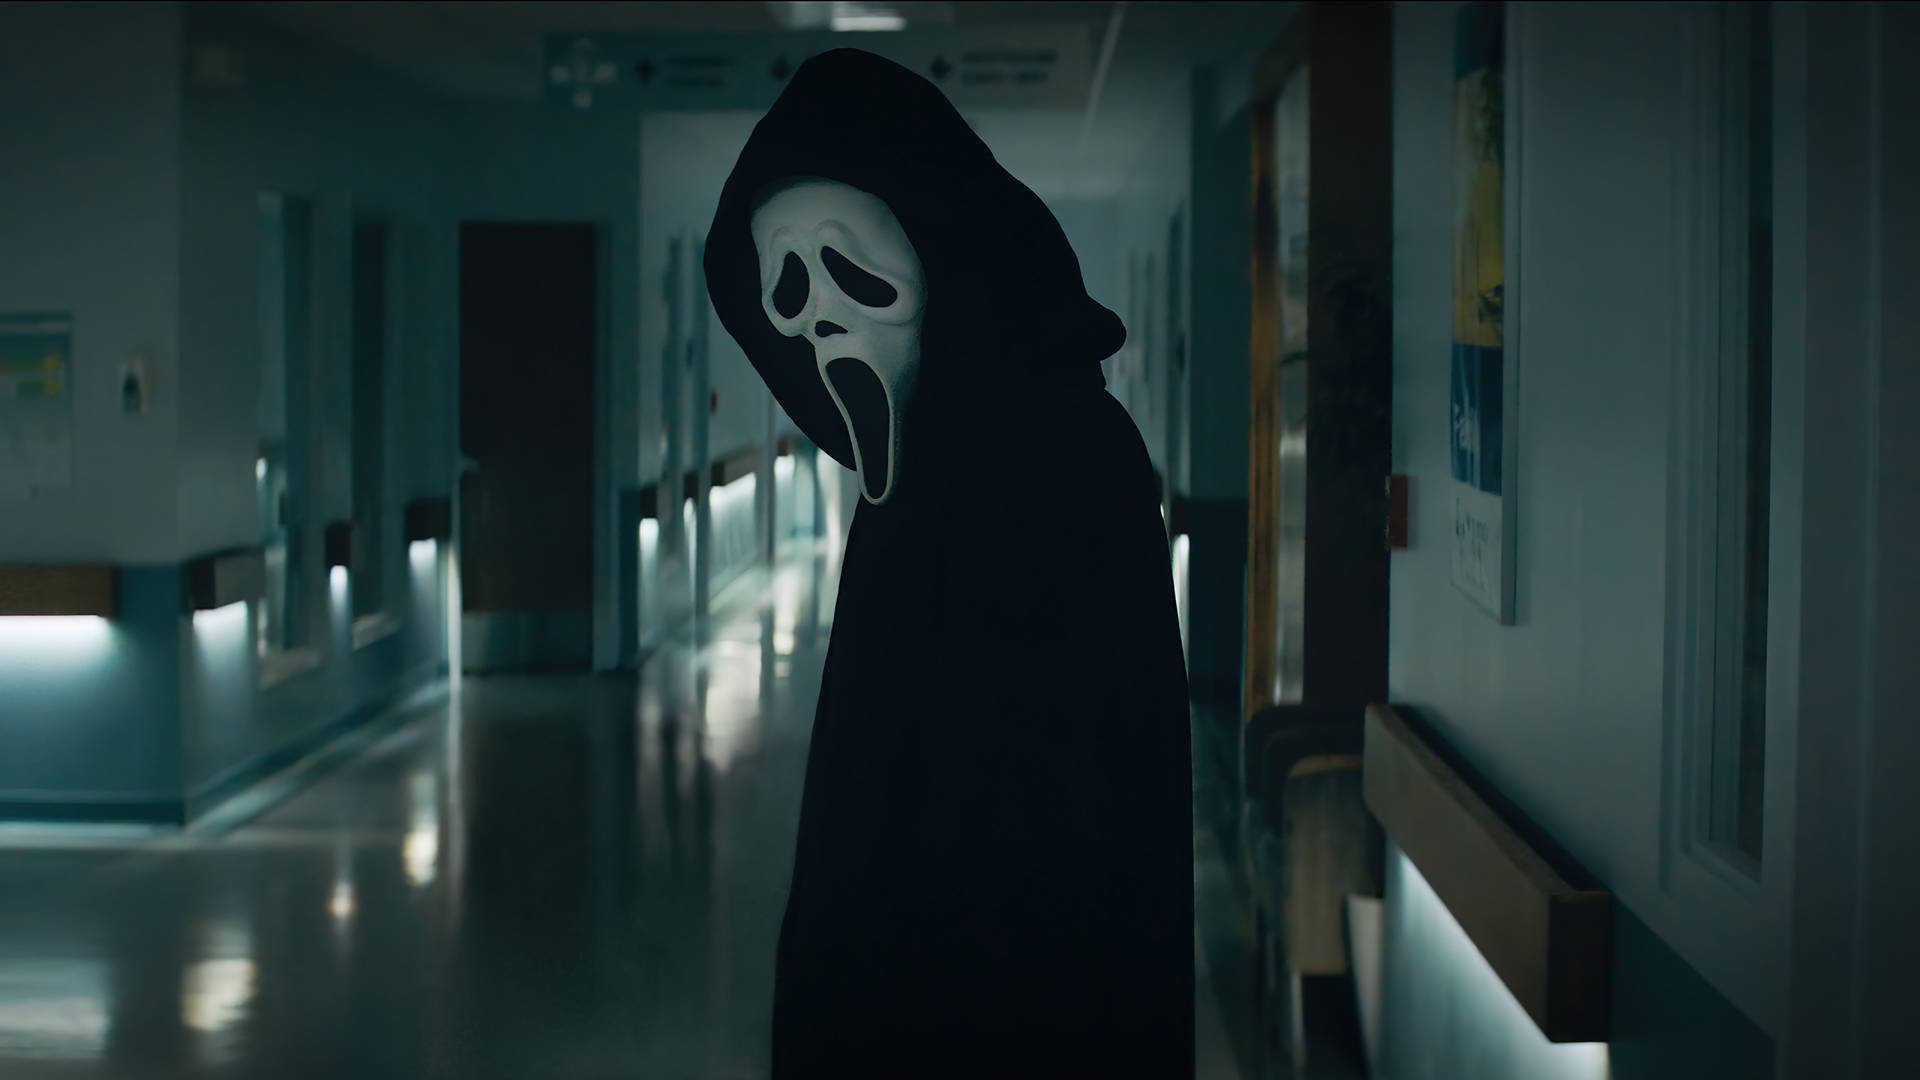 Ghostface from Scream in an eerie background Wallpaper